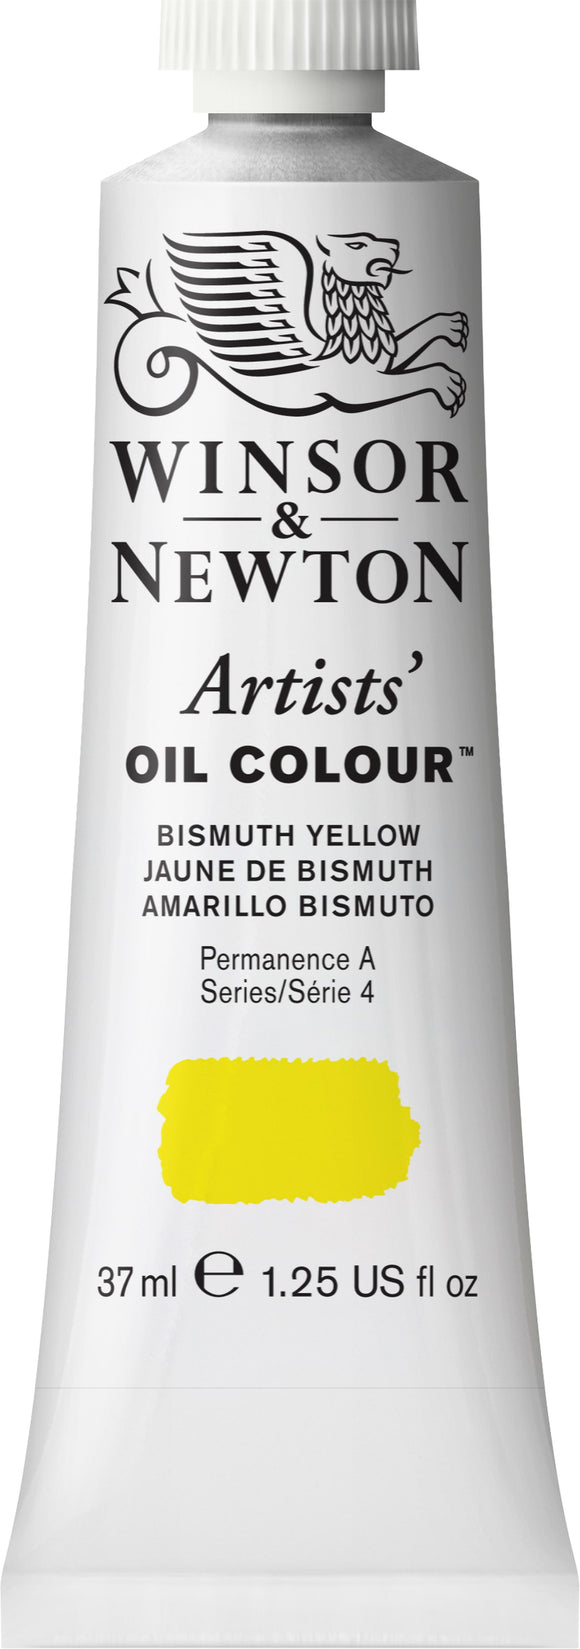 Winsor & Newton Artist Oil Colour Bismuth Yellow 37Ml